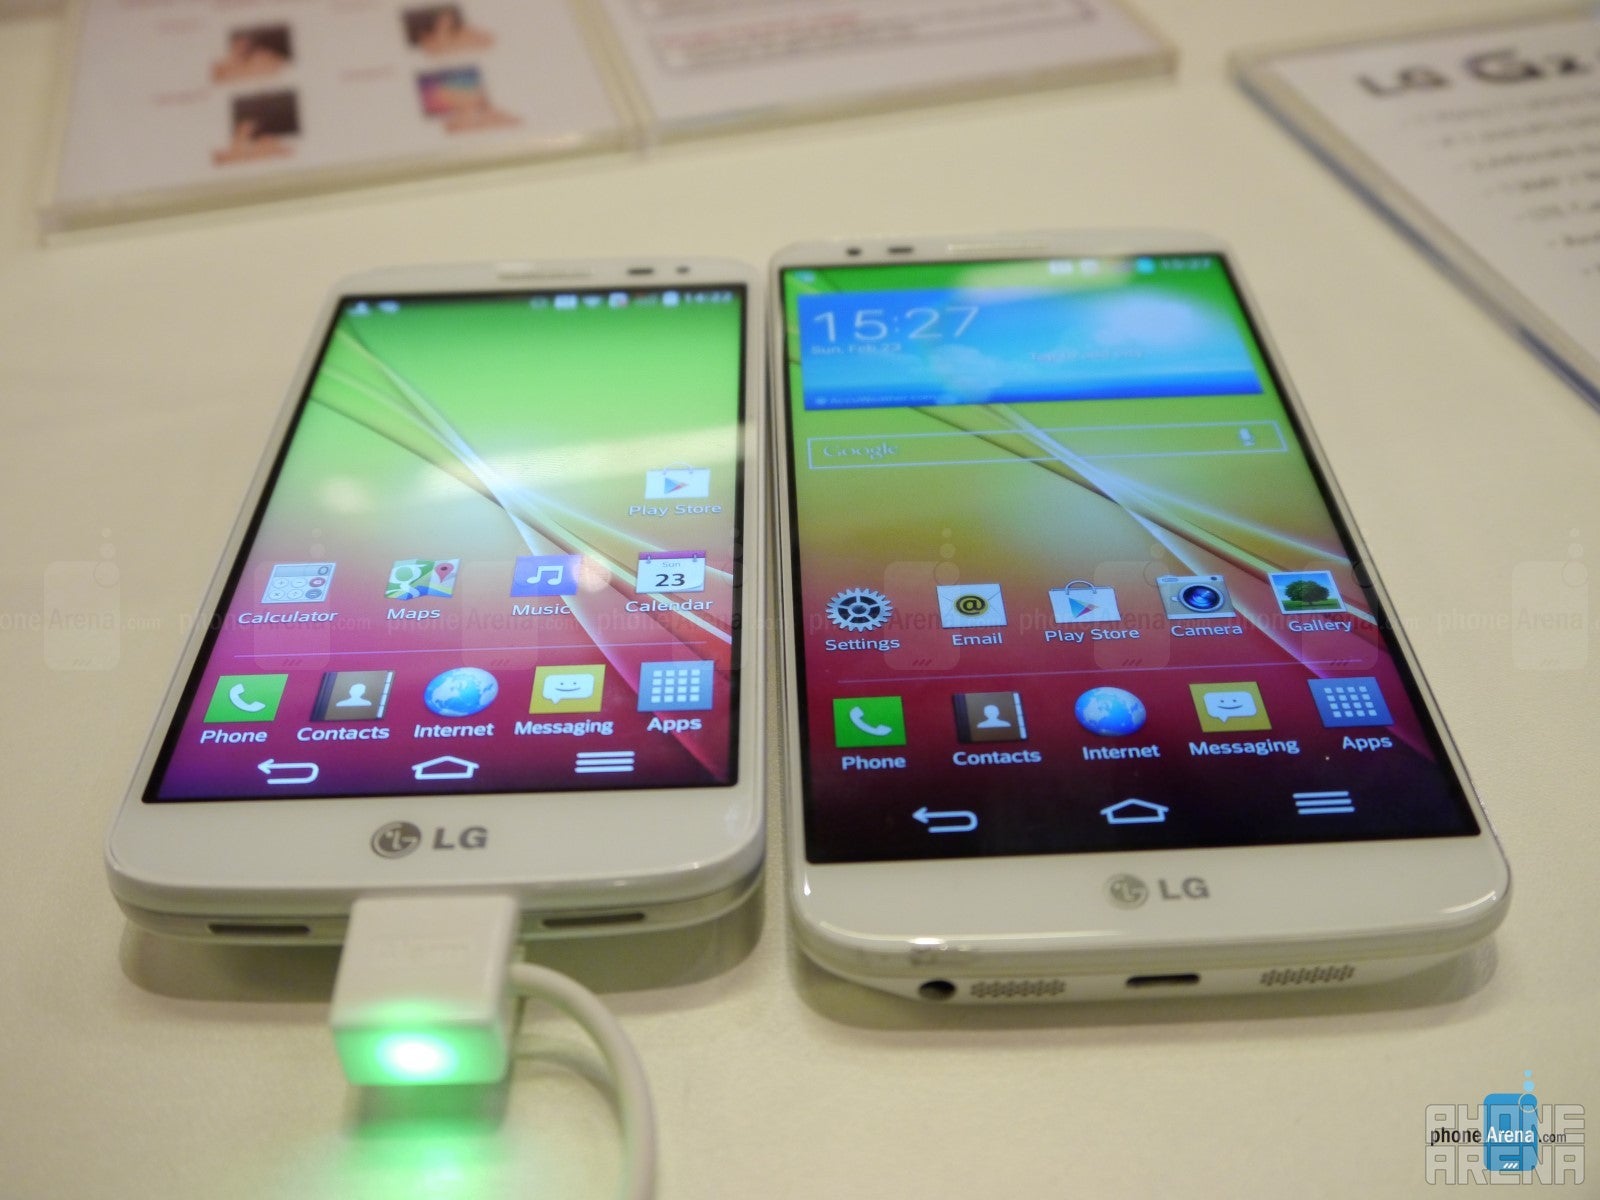 The LG G2 mini ships with Android 4.4 KitKat and the newest Optimus UI adding features like KnockCode - LG G2 mini vs LG G2: first look